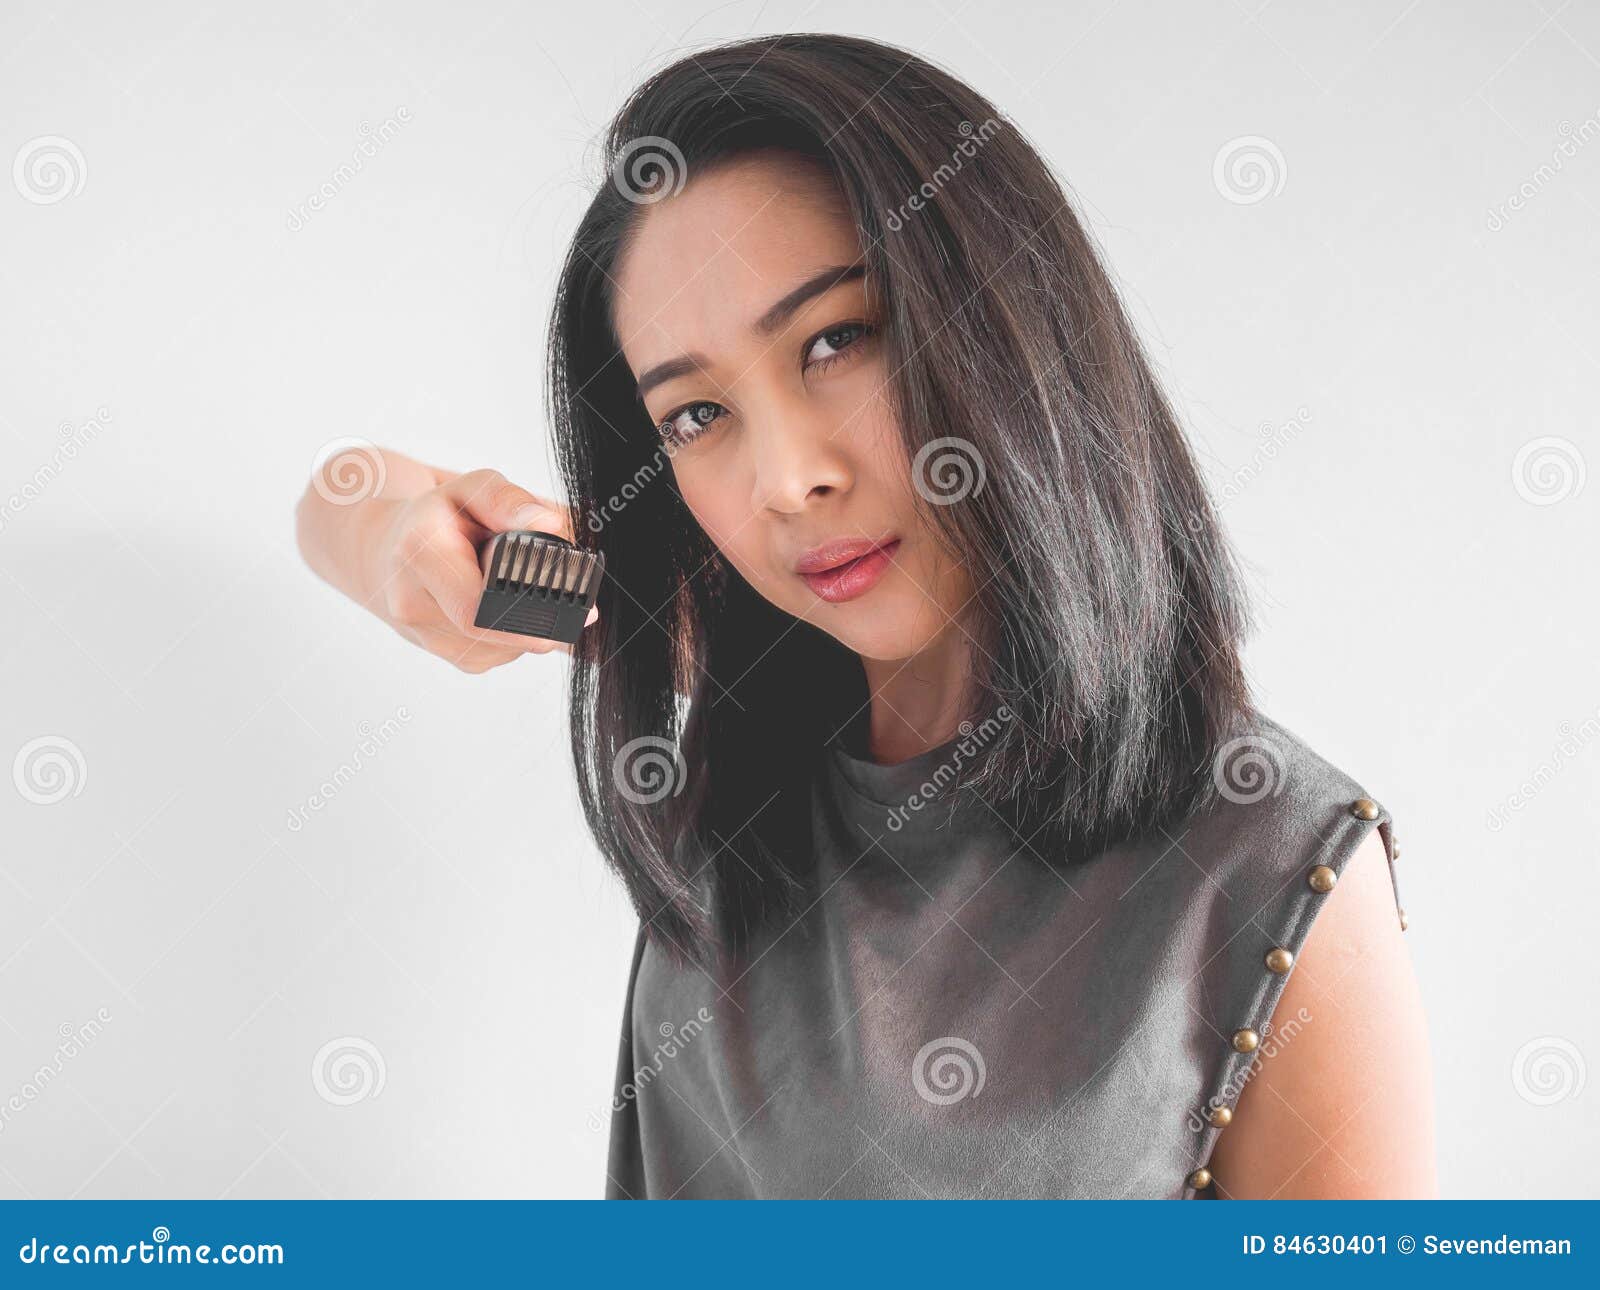 Woman Wants To Cut Her Hair. Stock Image - Image of care, hairstyle:  84630401